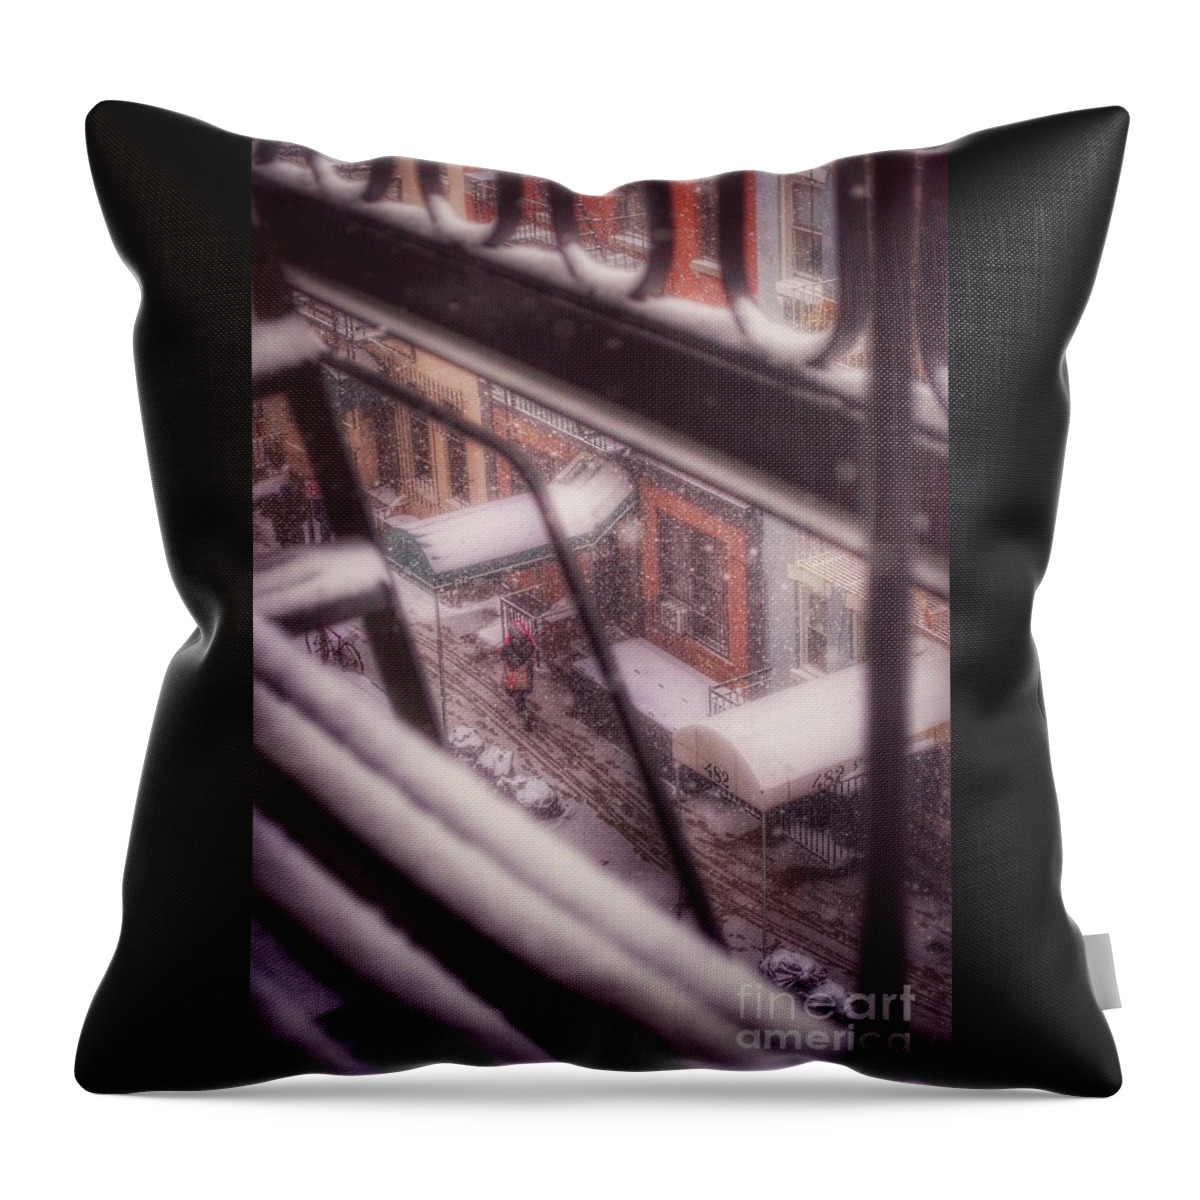 Winter In New York Throw Pillow featuring the photograph From My Window - Braving the Snow by Miriam Danar